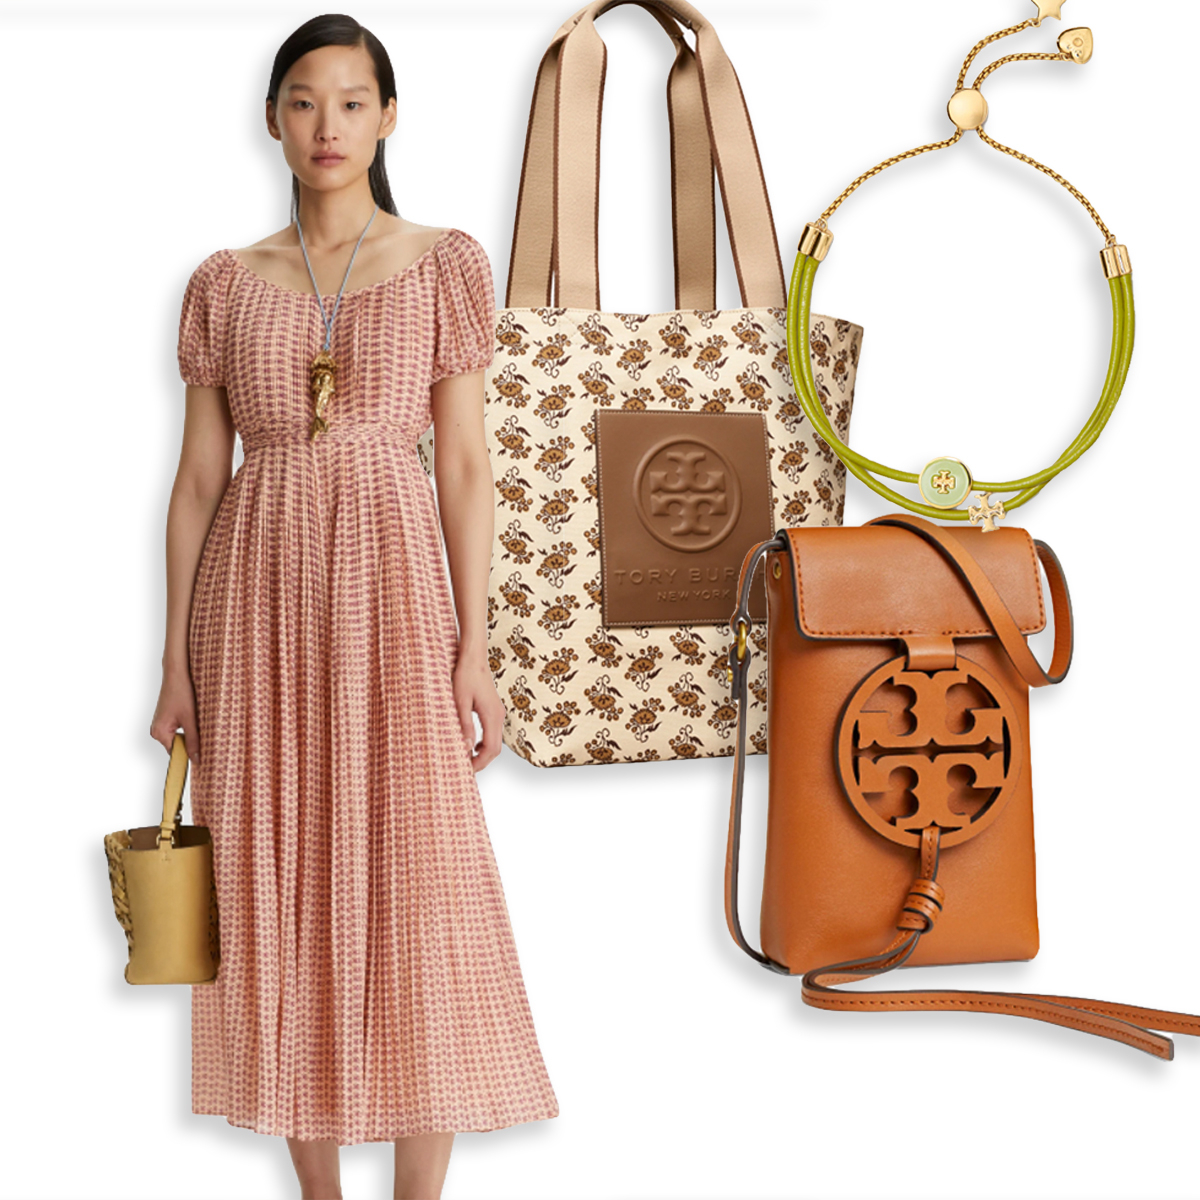 Tory Burch May 2023 Sale: Sandals, Bags, More Up to 50% Off - Parade